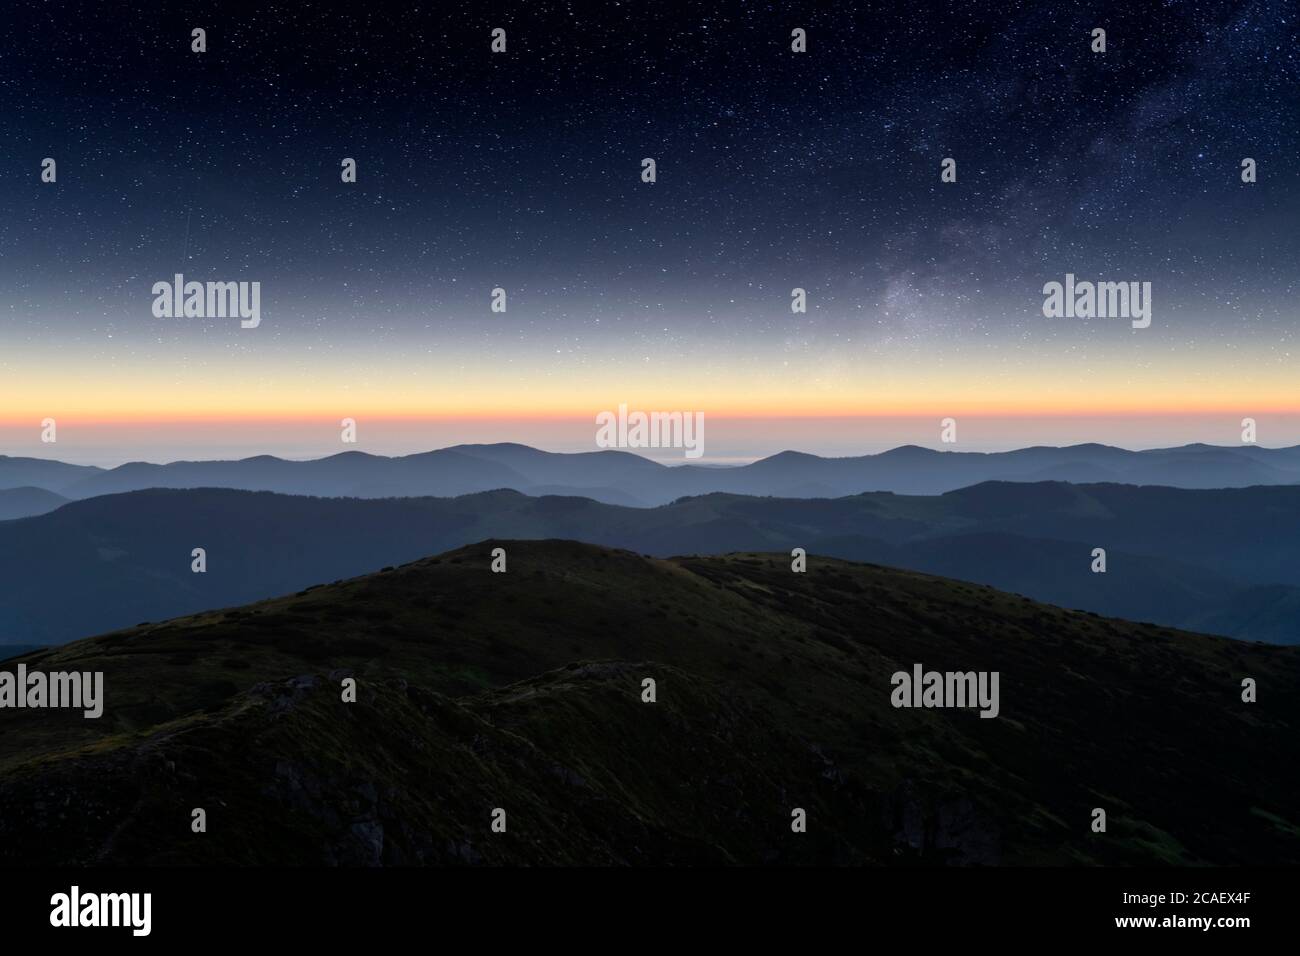 Mountains range against the backdrop of an incredible starry sky. Amazing night landscape with Milky Way. Tourism concept Stock Photo